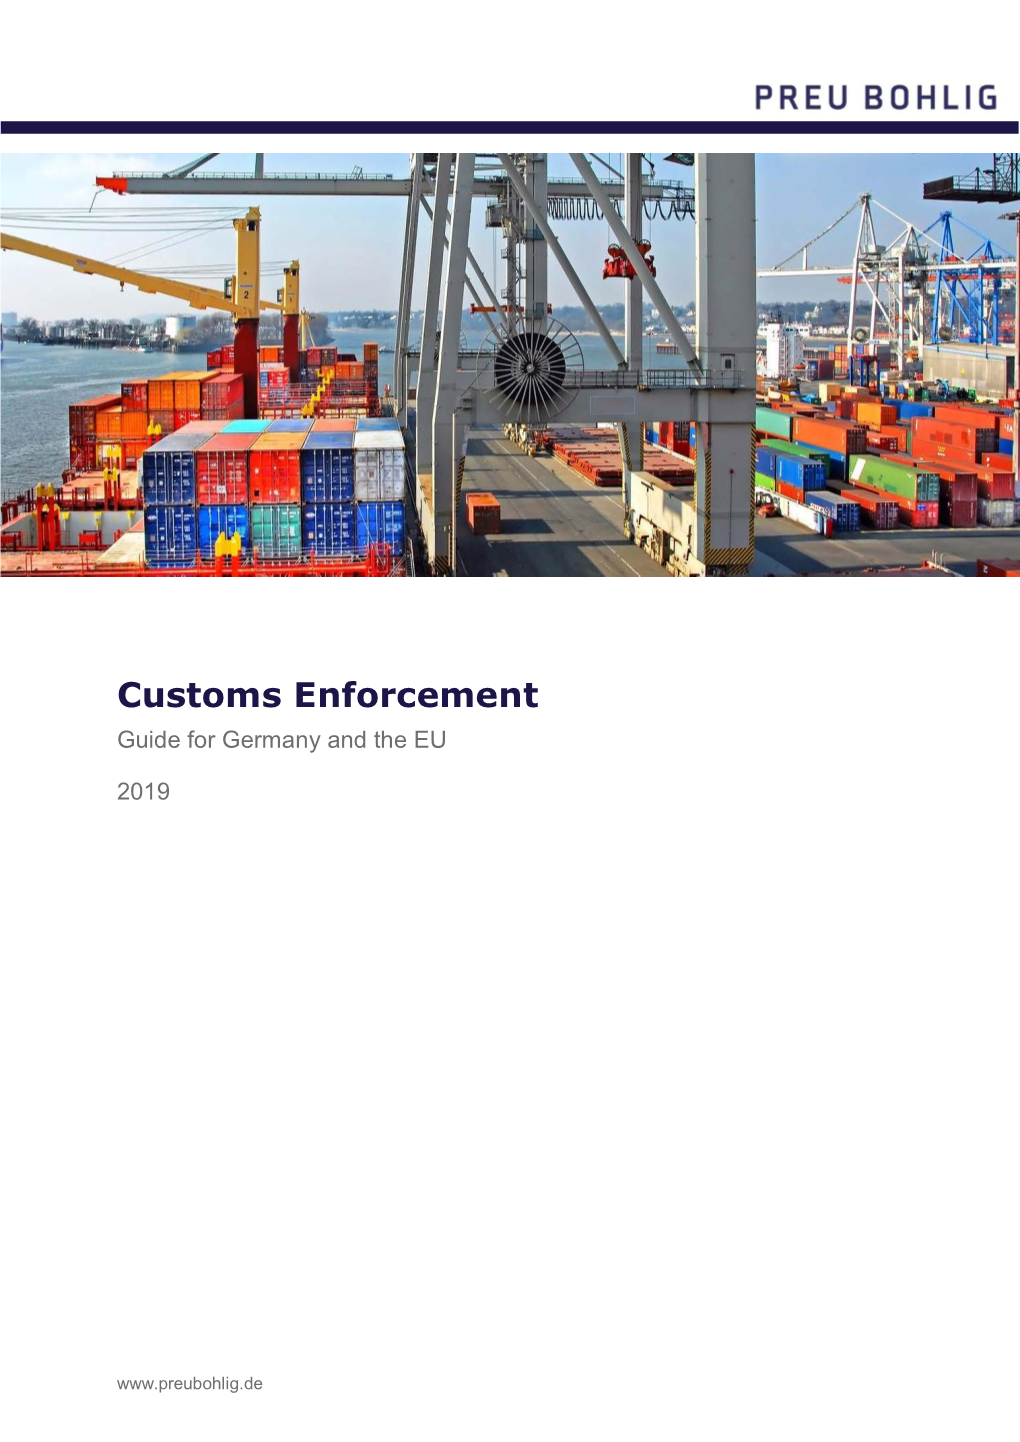 Customs Enforcement Guide for Germany and the EU